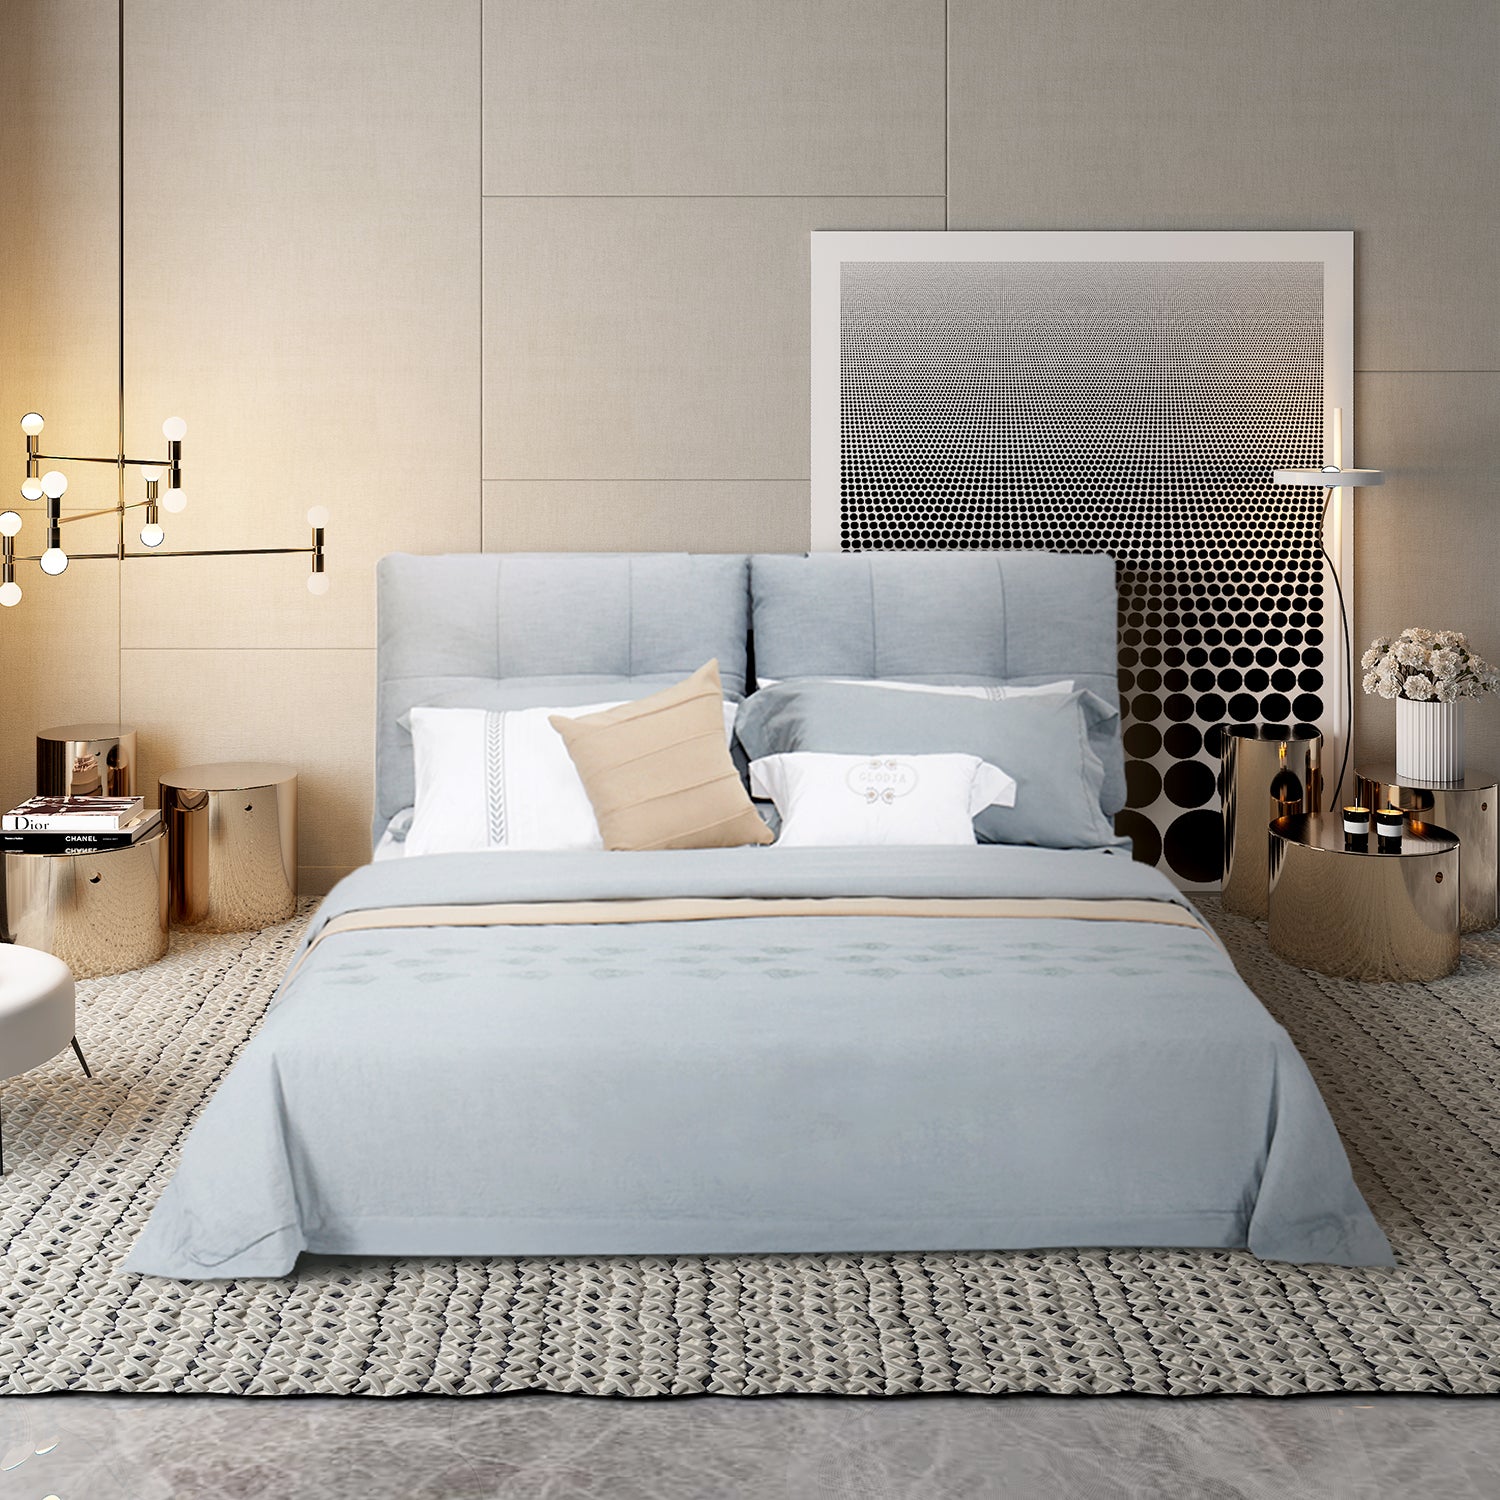 DeRUCCI Bed Frame BZZ4-285 in modern bedroom with gray upholstered headboard, beige and white pillows, patterned rug, contemporary lighting, and large abstract art piece.